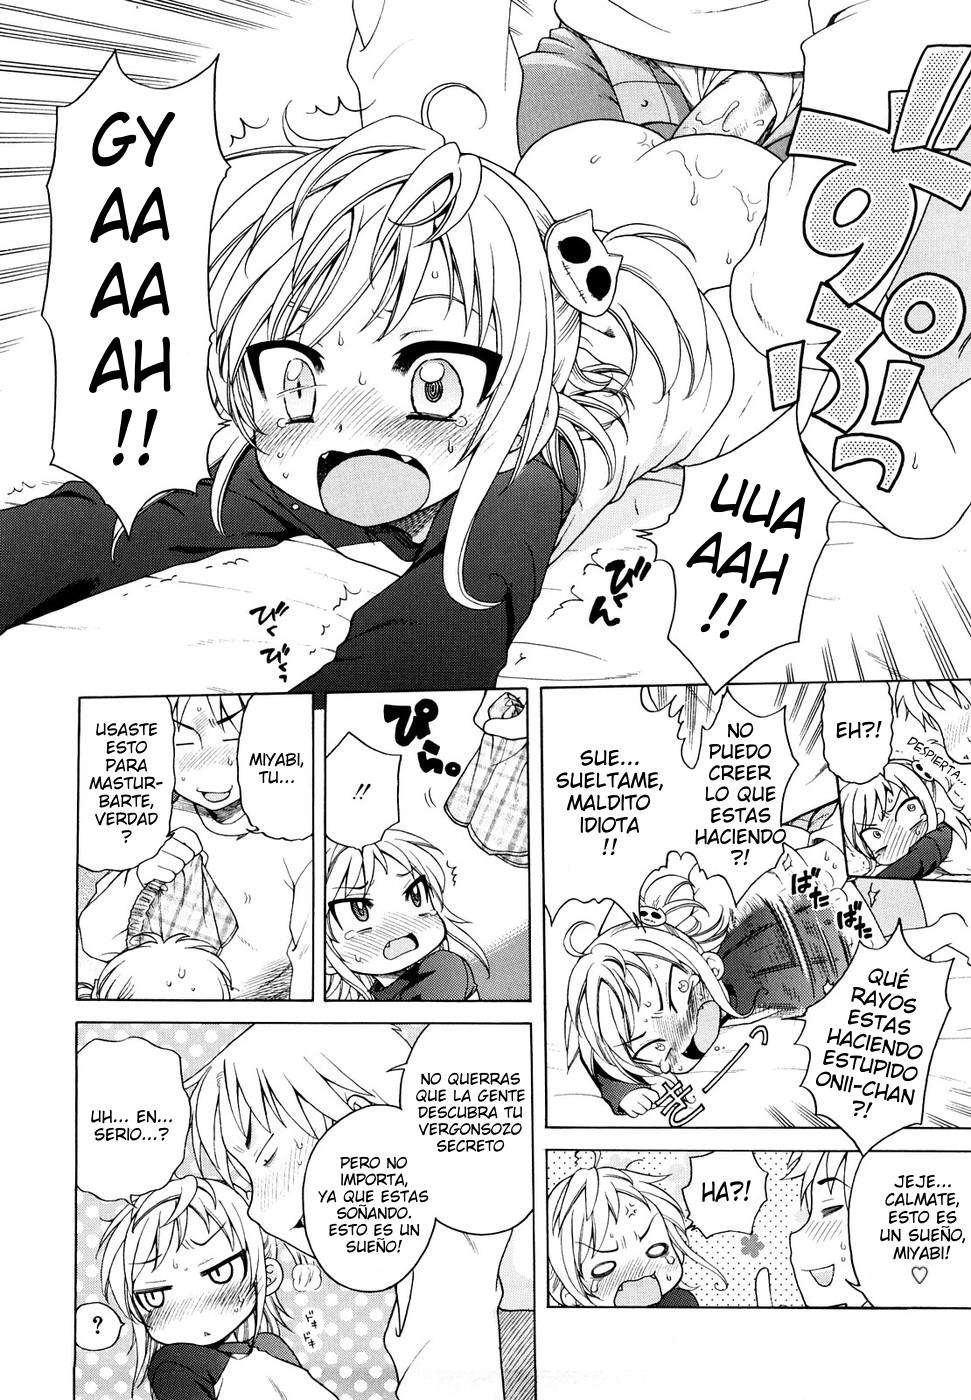 Onii-chan!! Me gustas.. Chapter-1 - 16